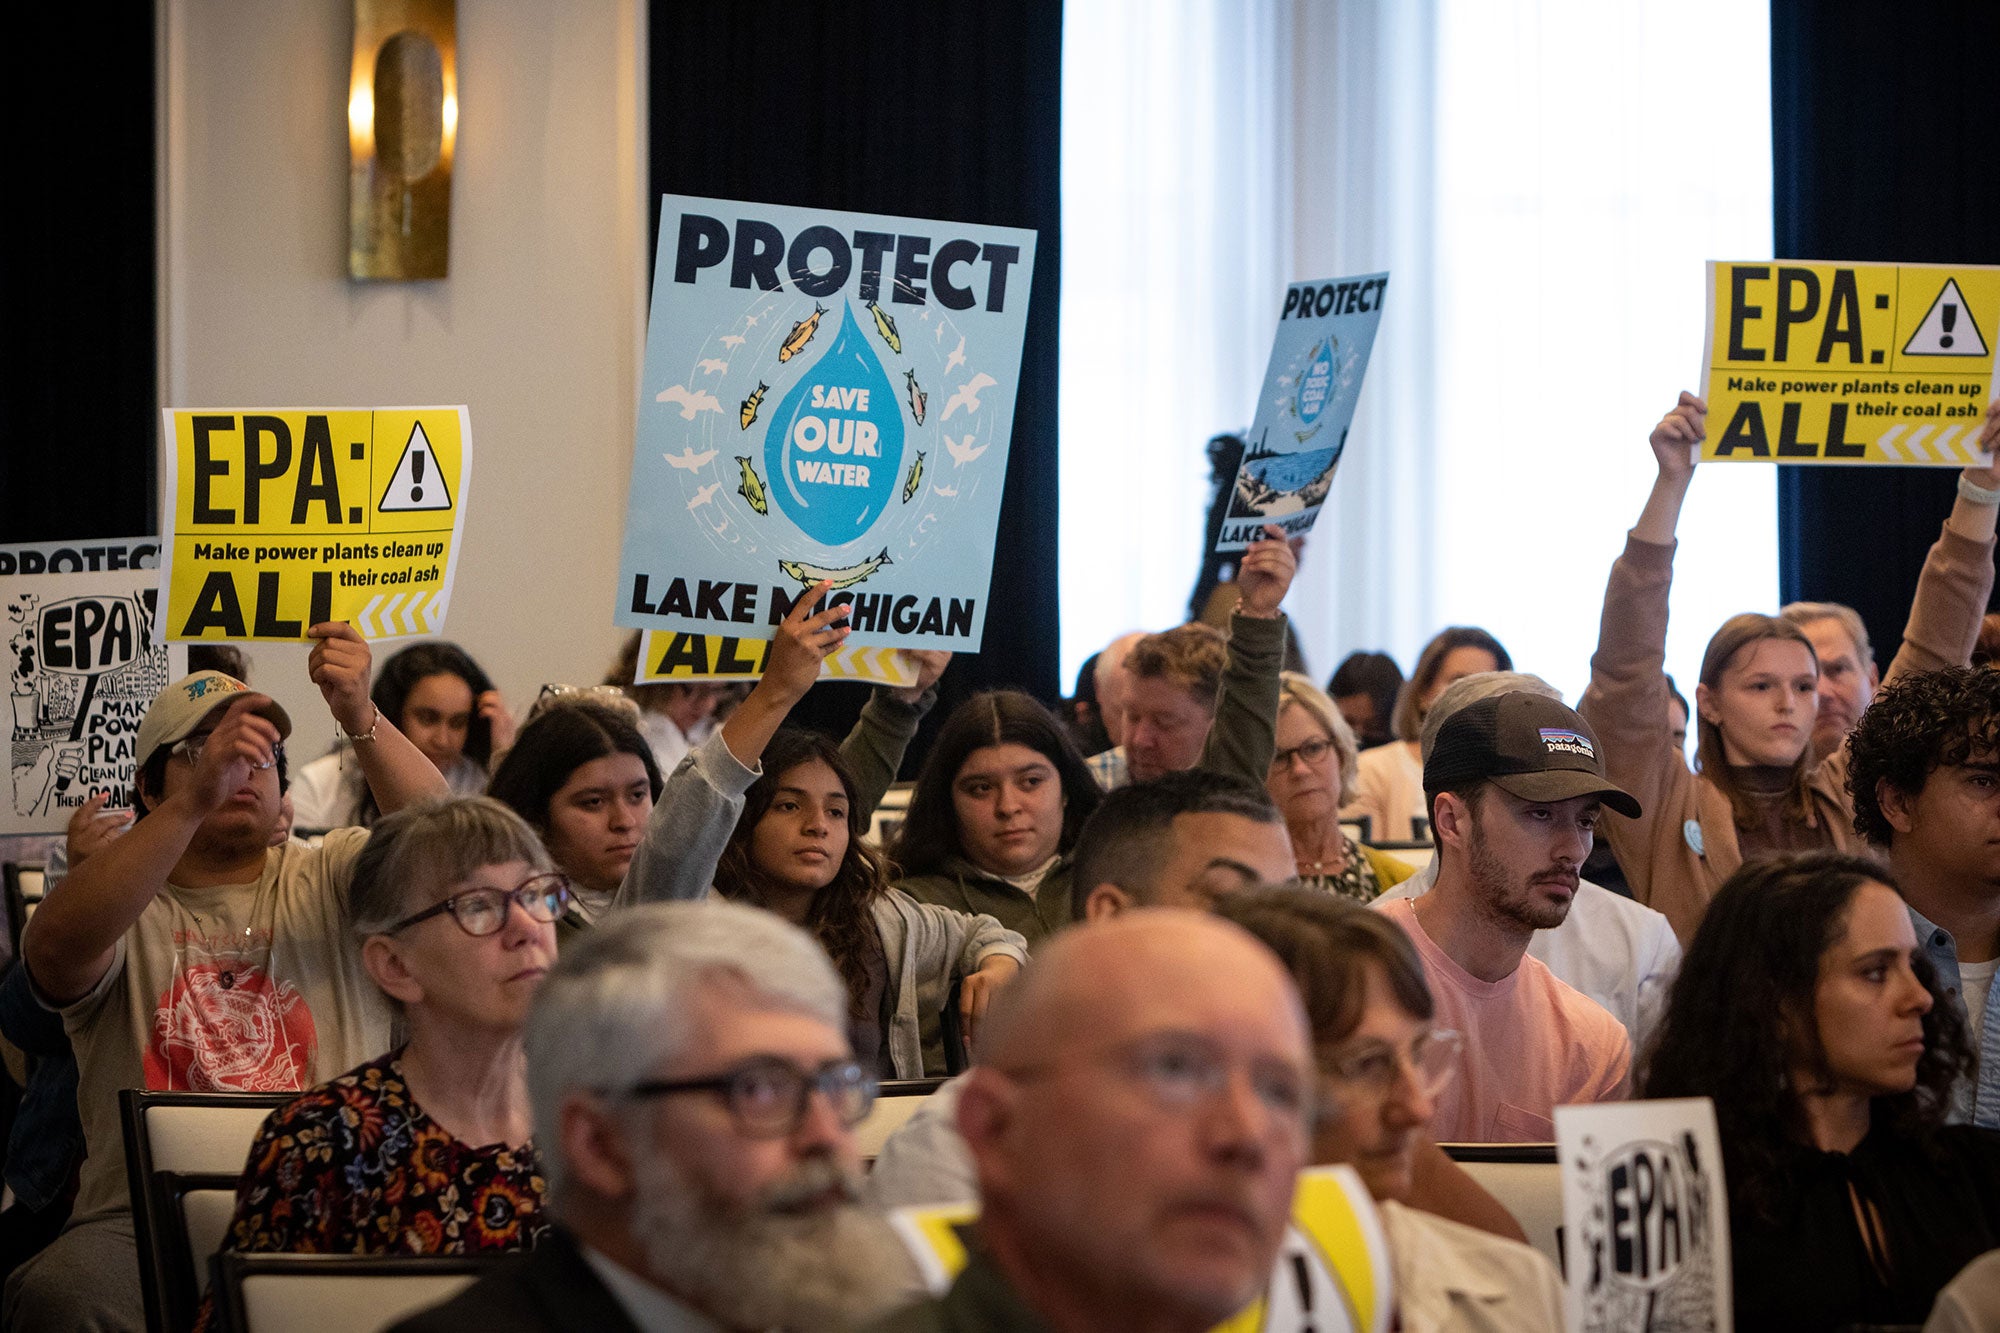 Changemakers fill the room at the EPA public hearing in Chicago.